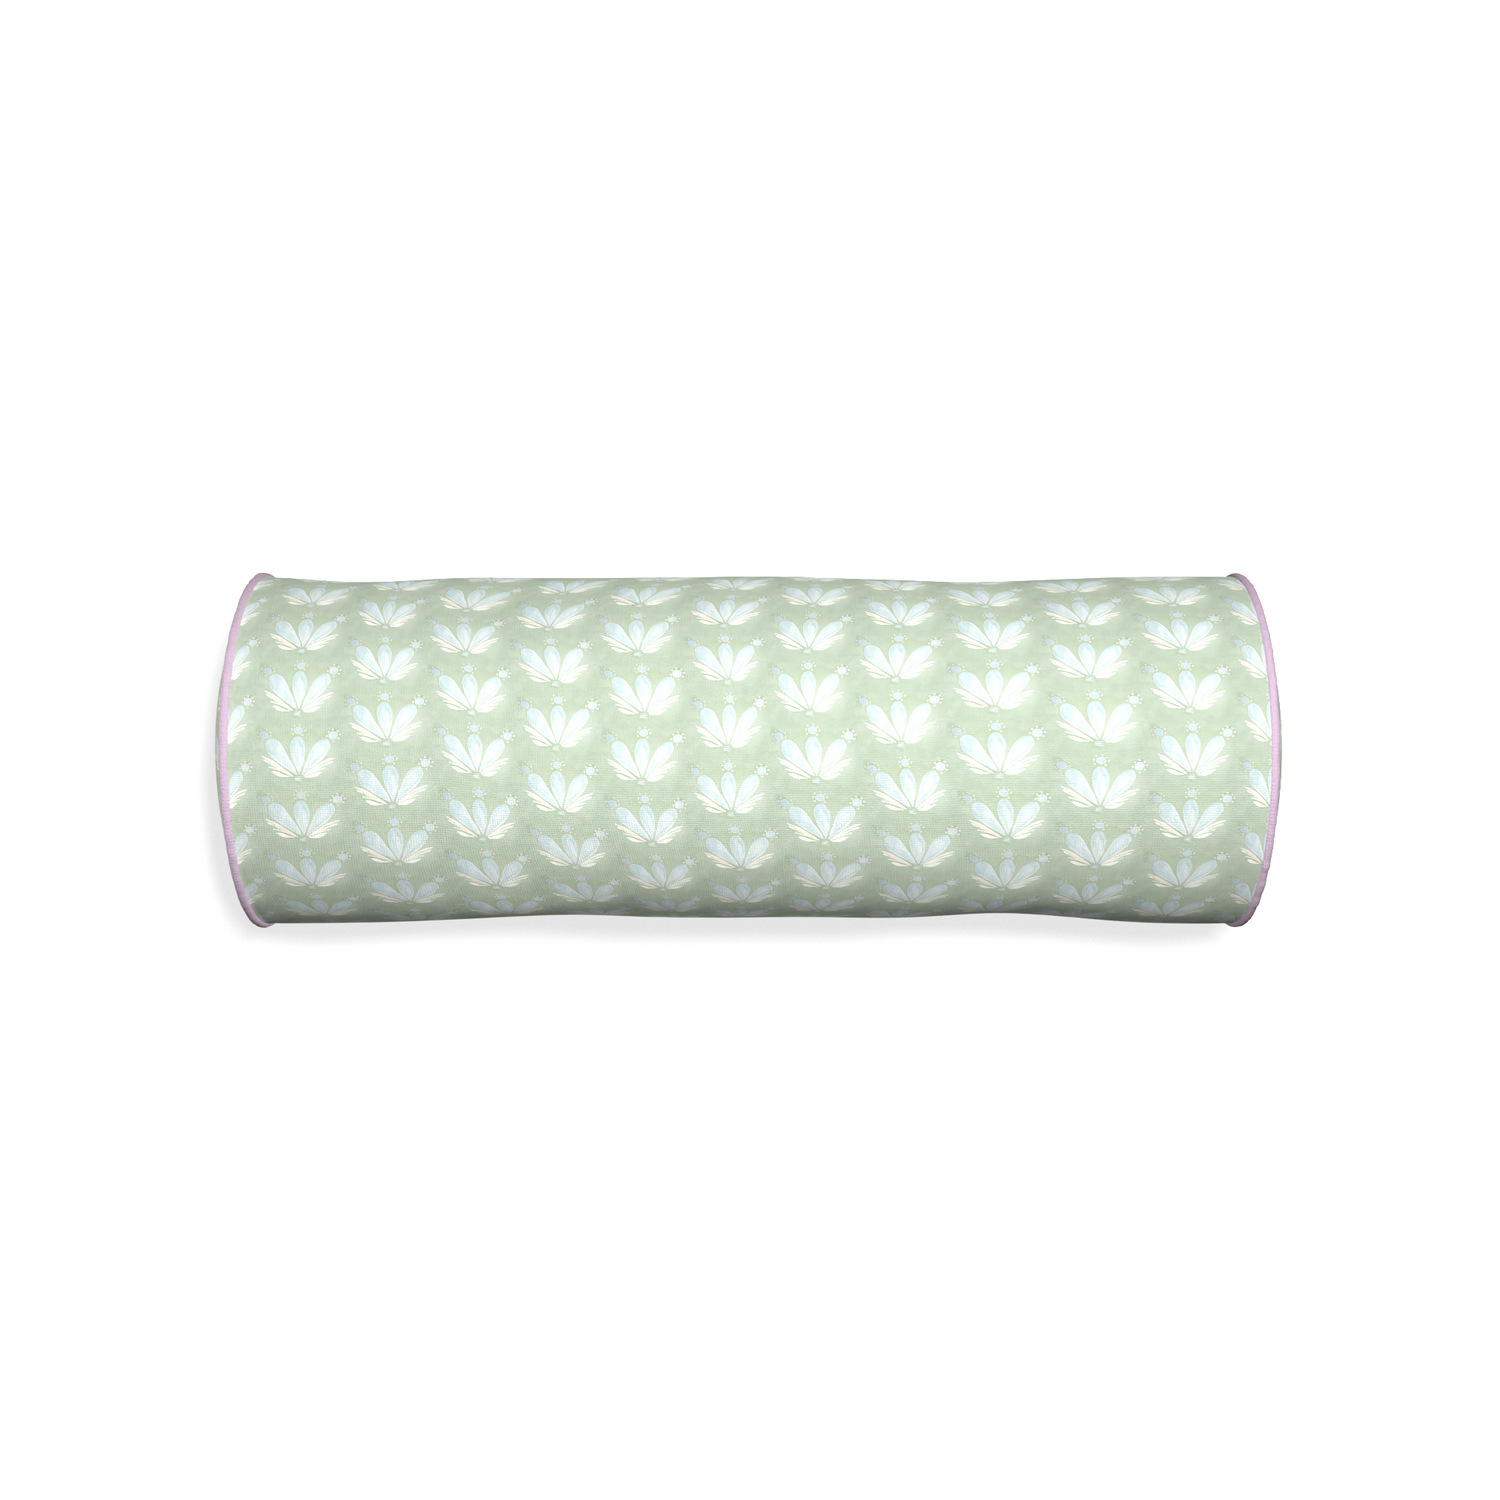 Bolster serena sea salt custom pillow with l piping on white background